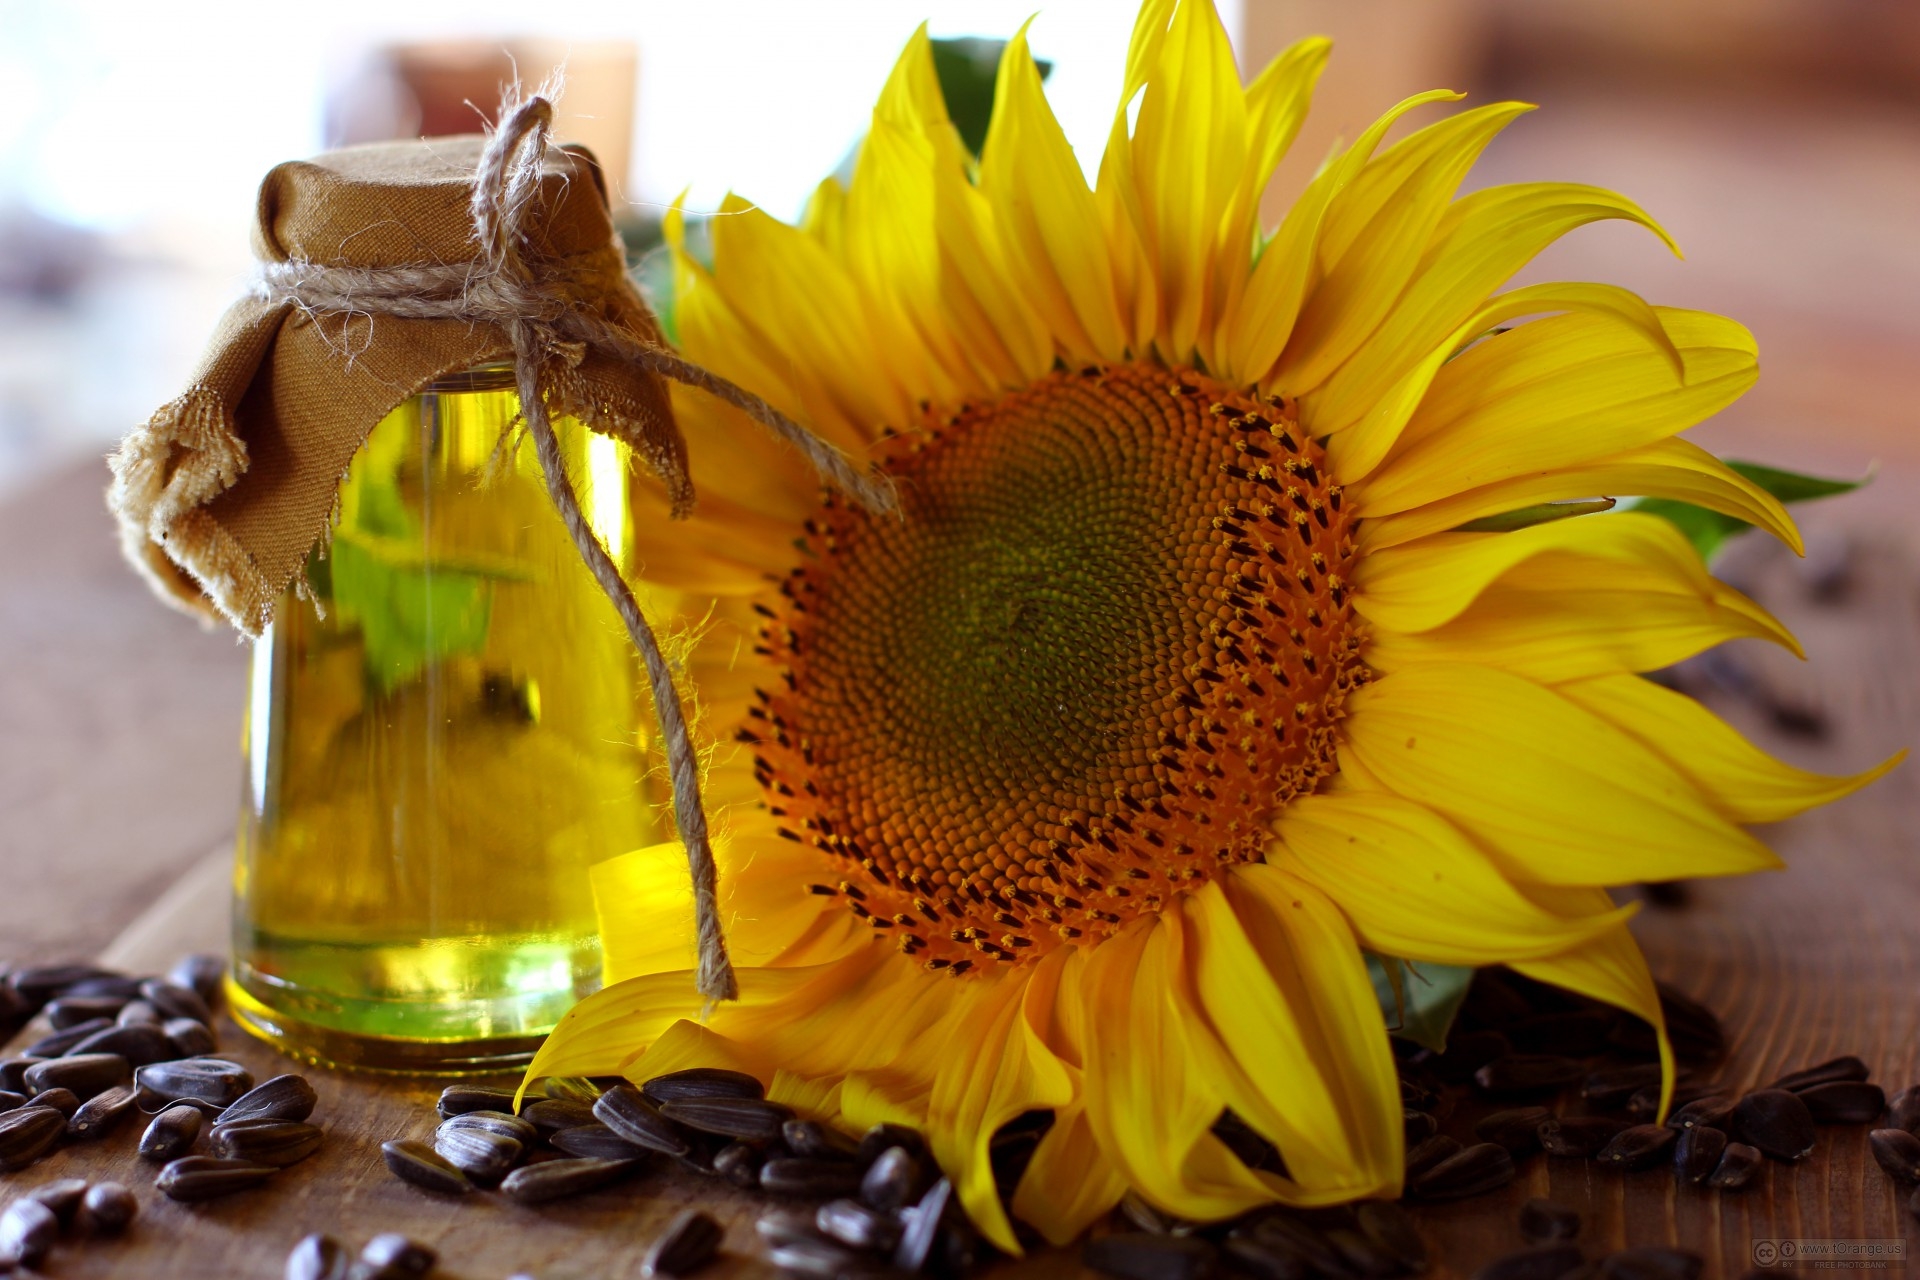 Sunflower prices continue to fall despite unchanged production forecasts 